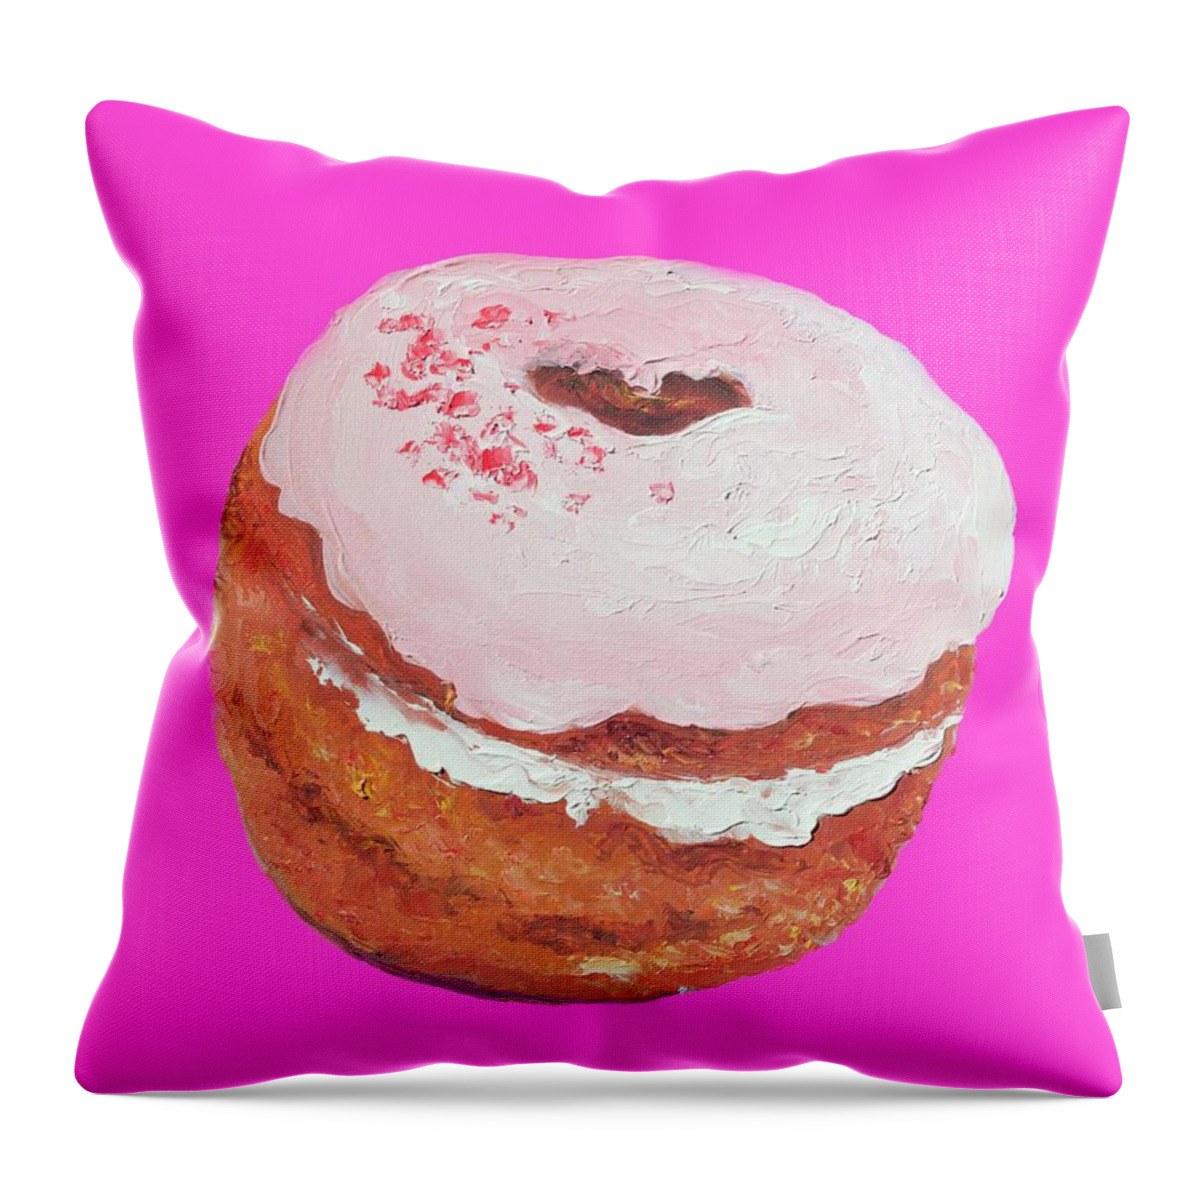 Cronut Throw Pillow featuring the painting Donut Painting by Jan Matson